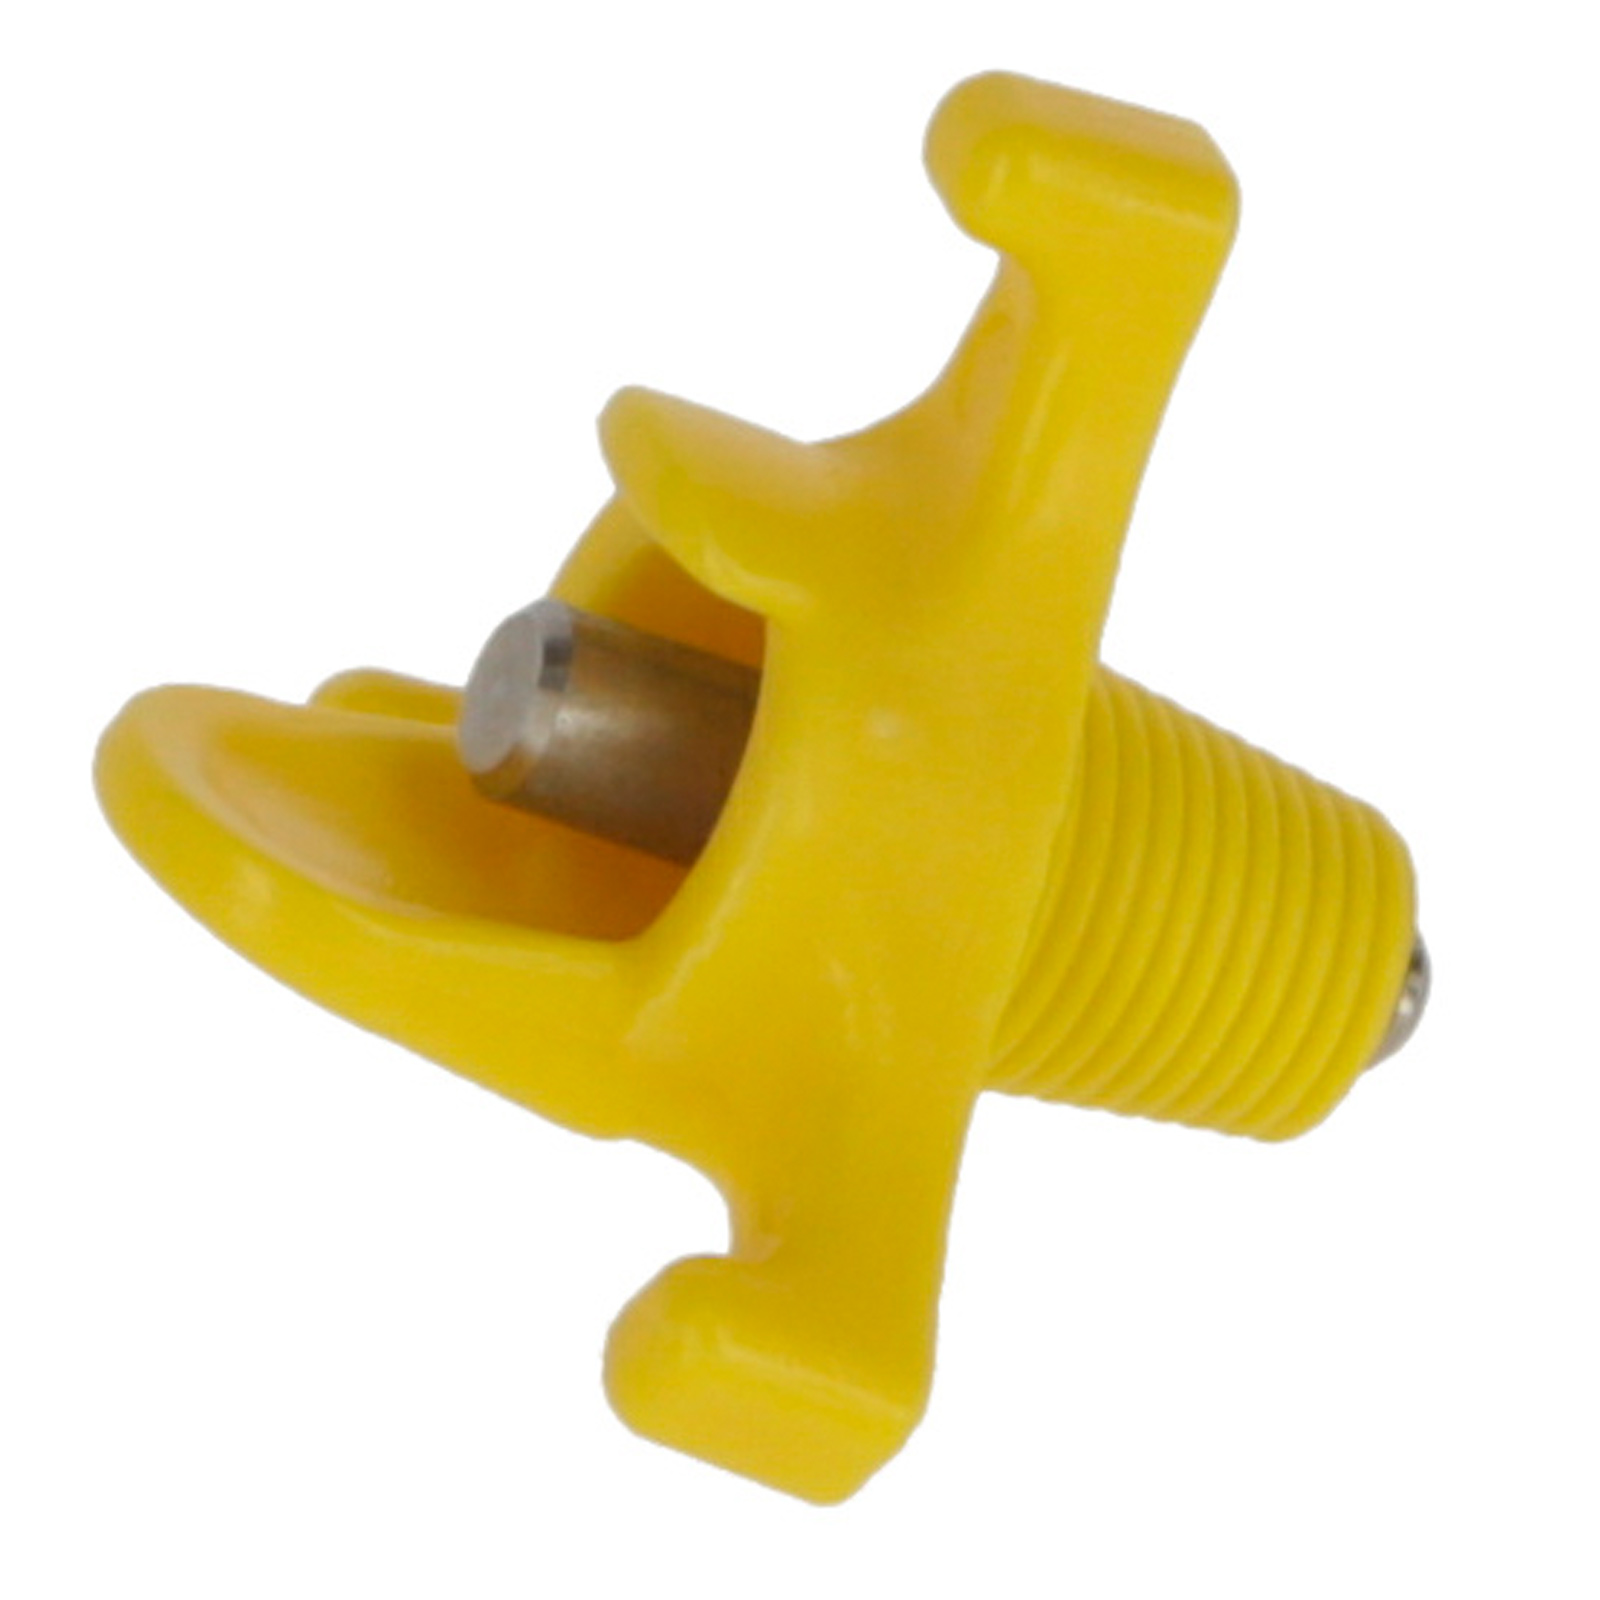 4x Nipple Drinker for Poultry